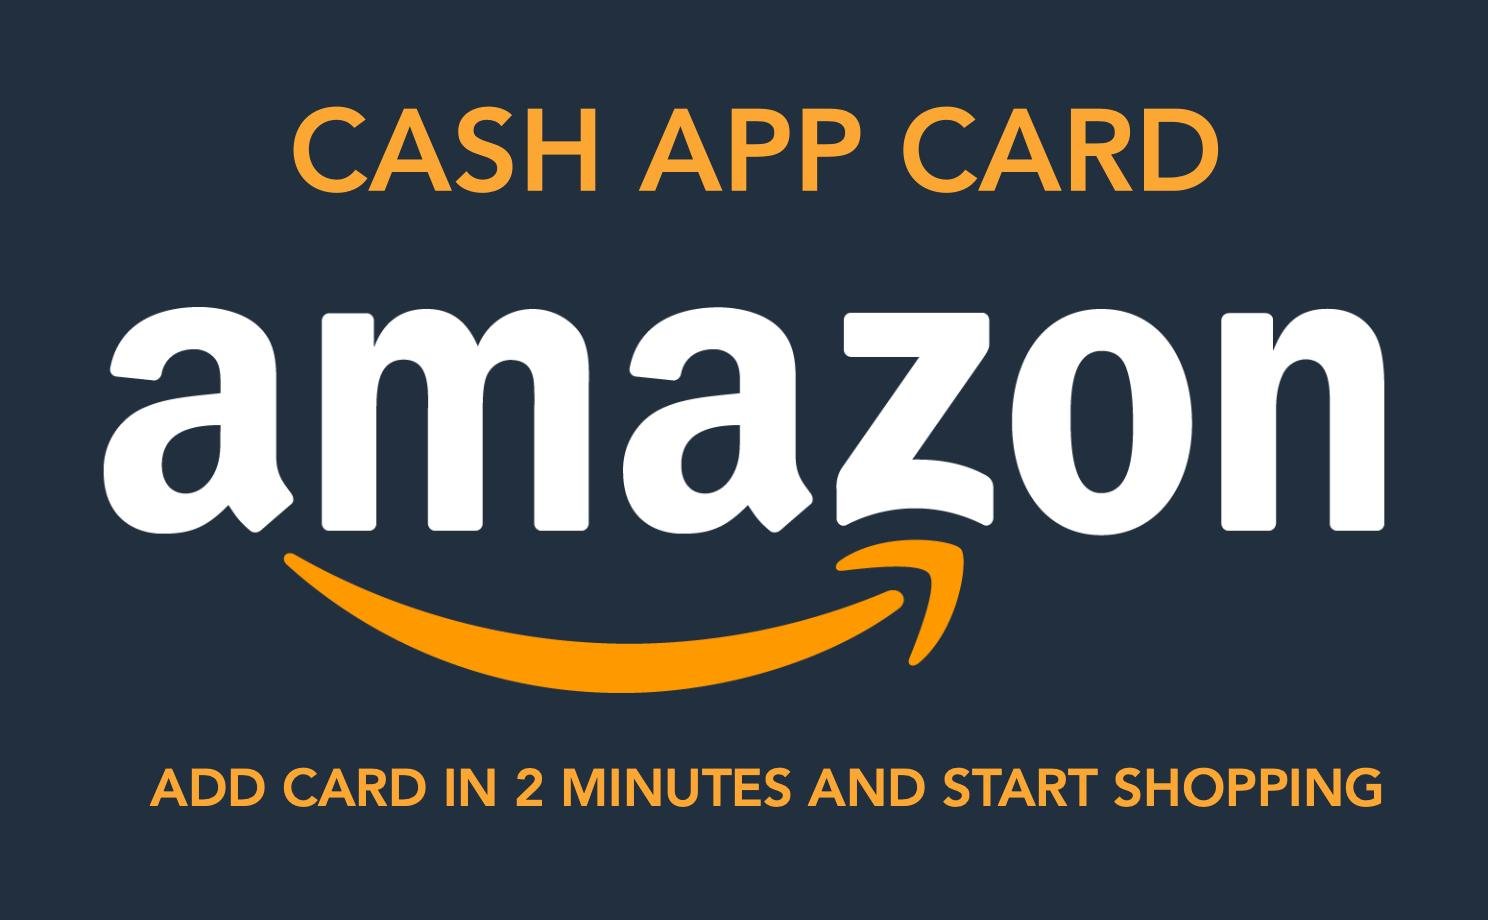 Can You Use a Cash App Card on Amazon